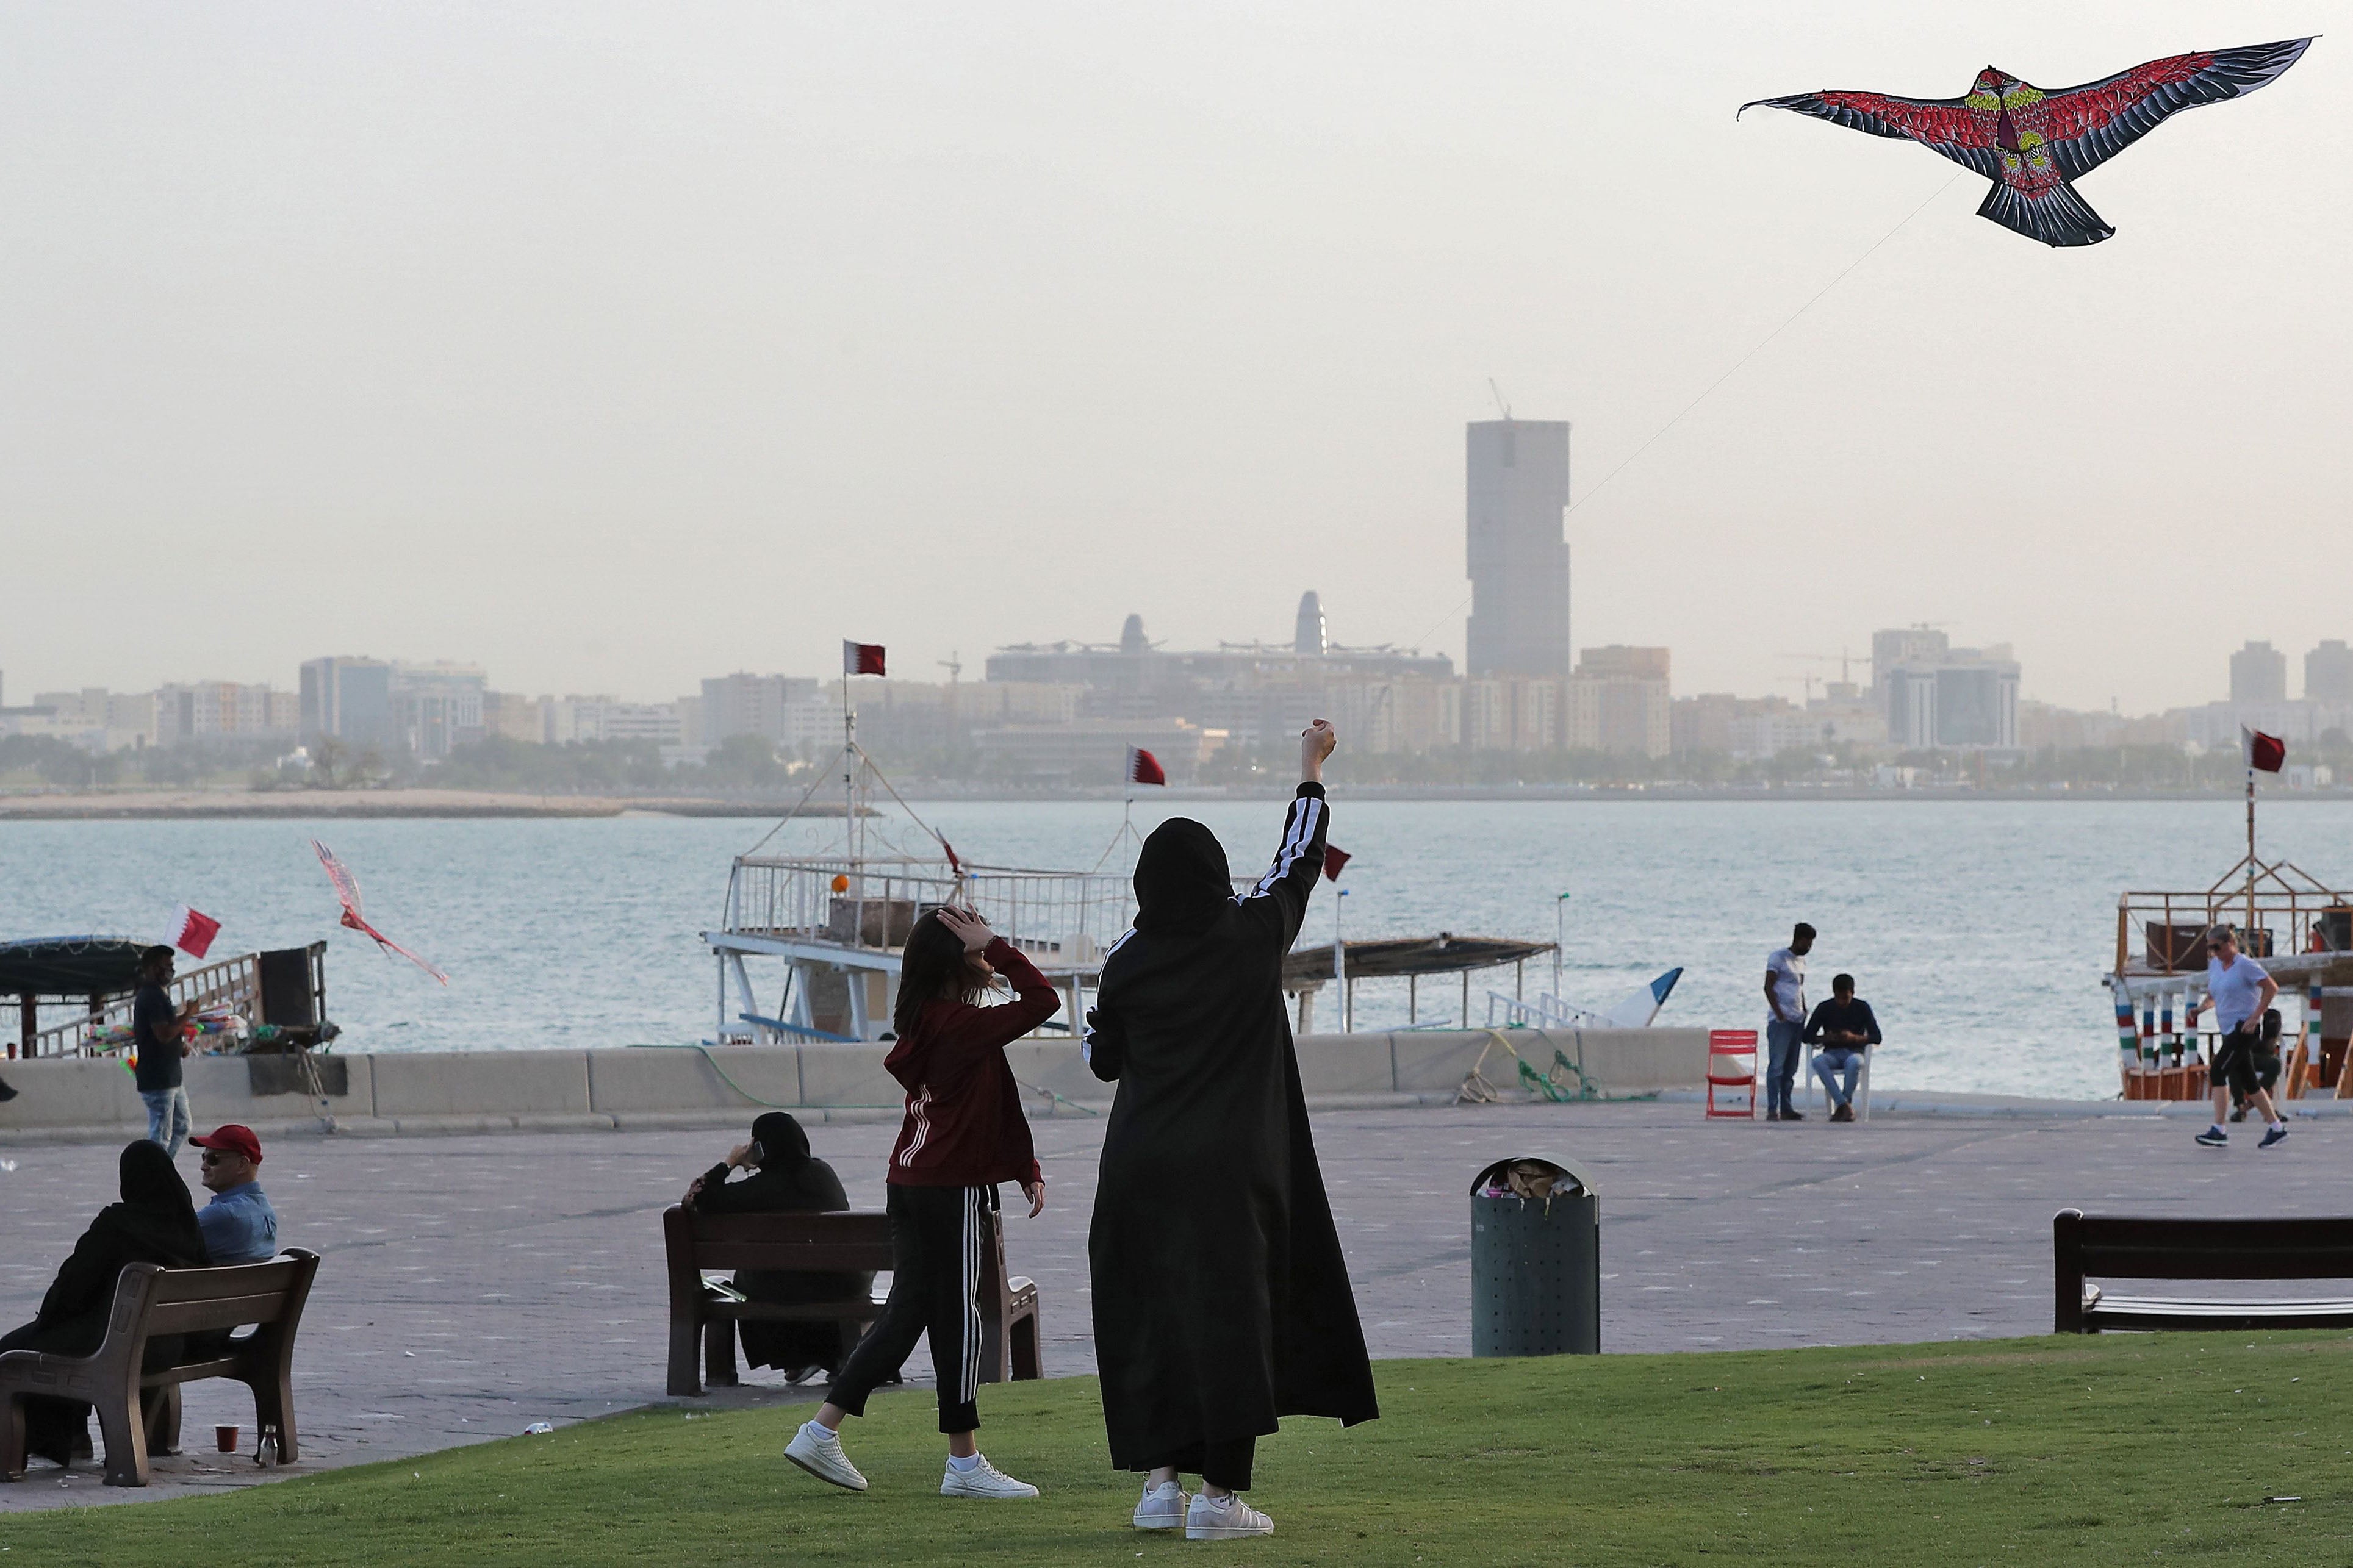 Women fly a kite in a park next to a body of water